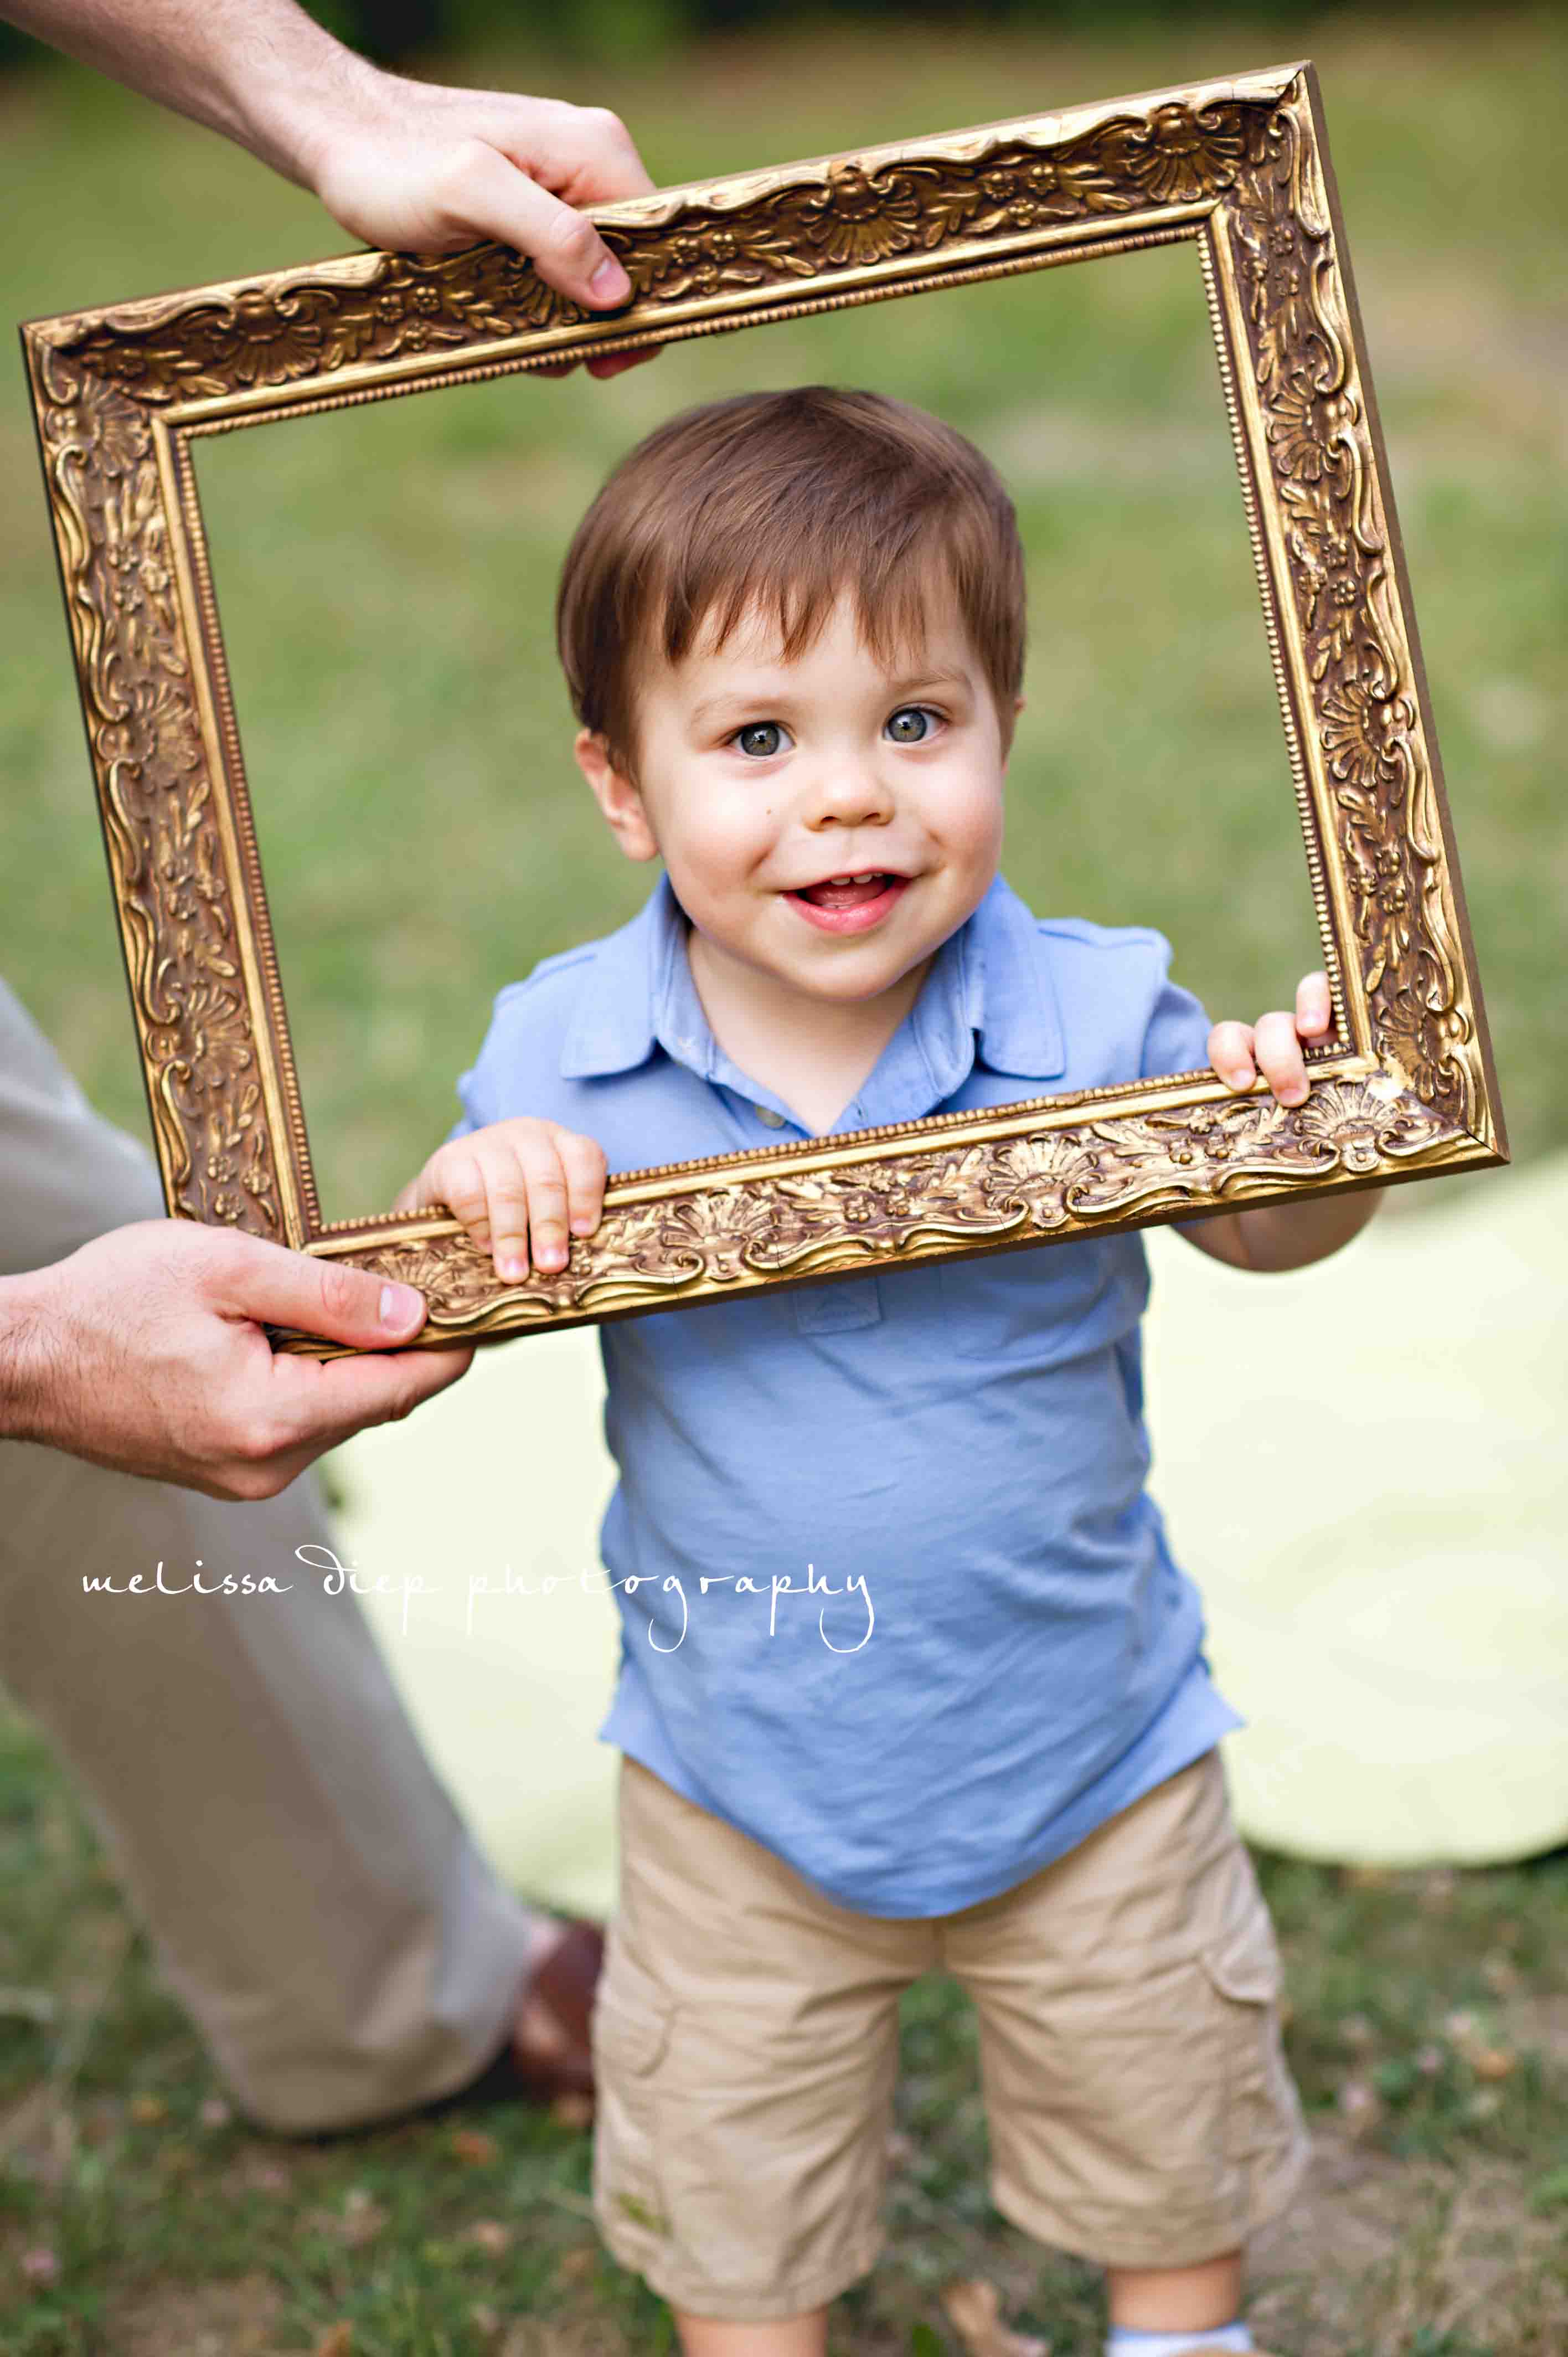 Picture Perfect: Amber, Brett and Brayden's Family Shoot